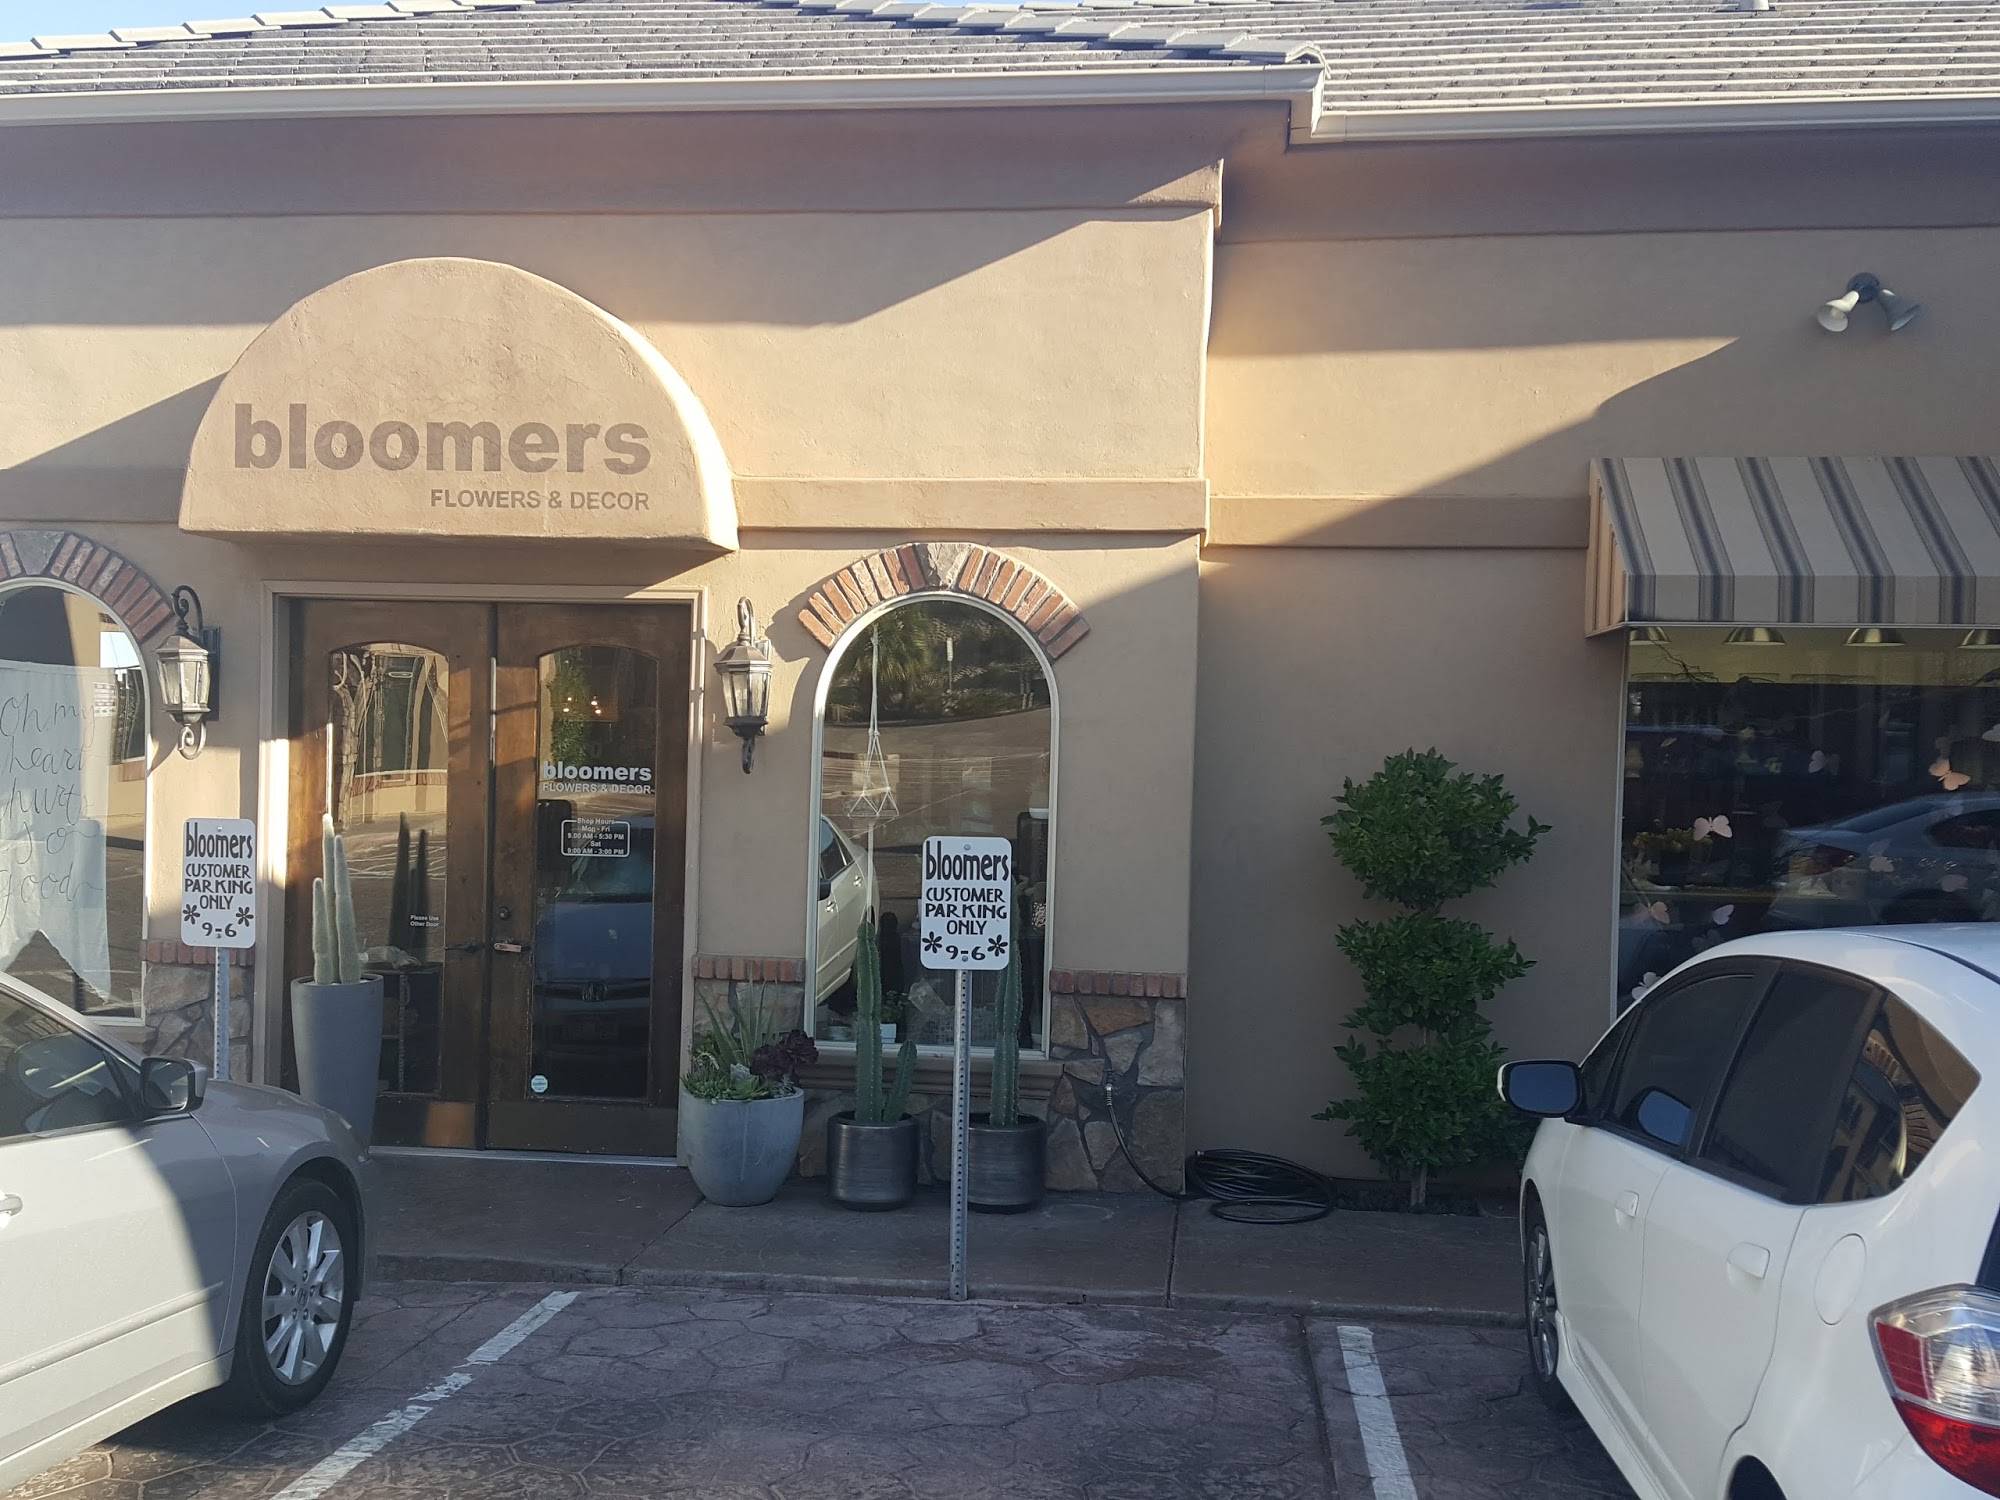 Bloomers Flowers & Decor